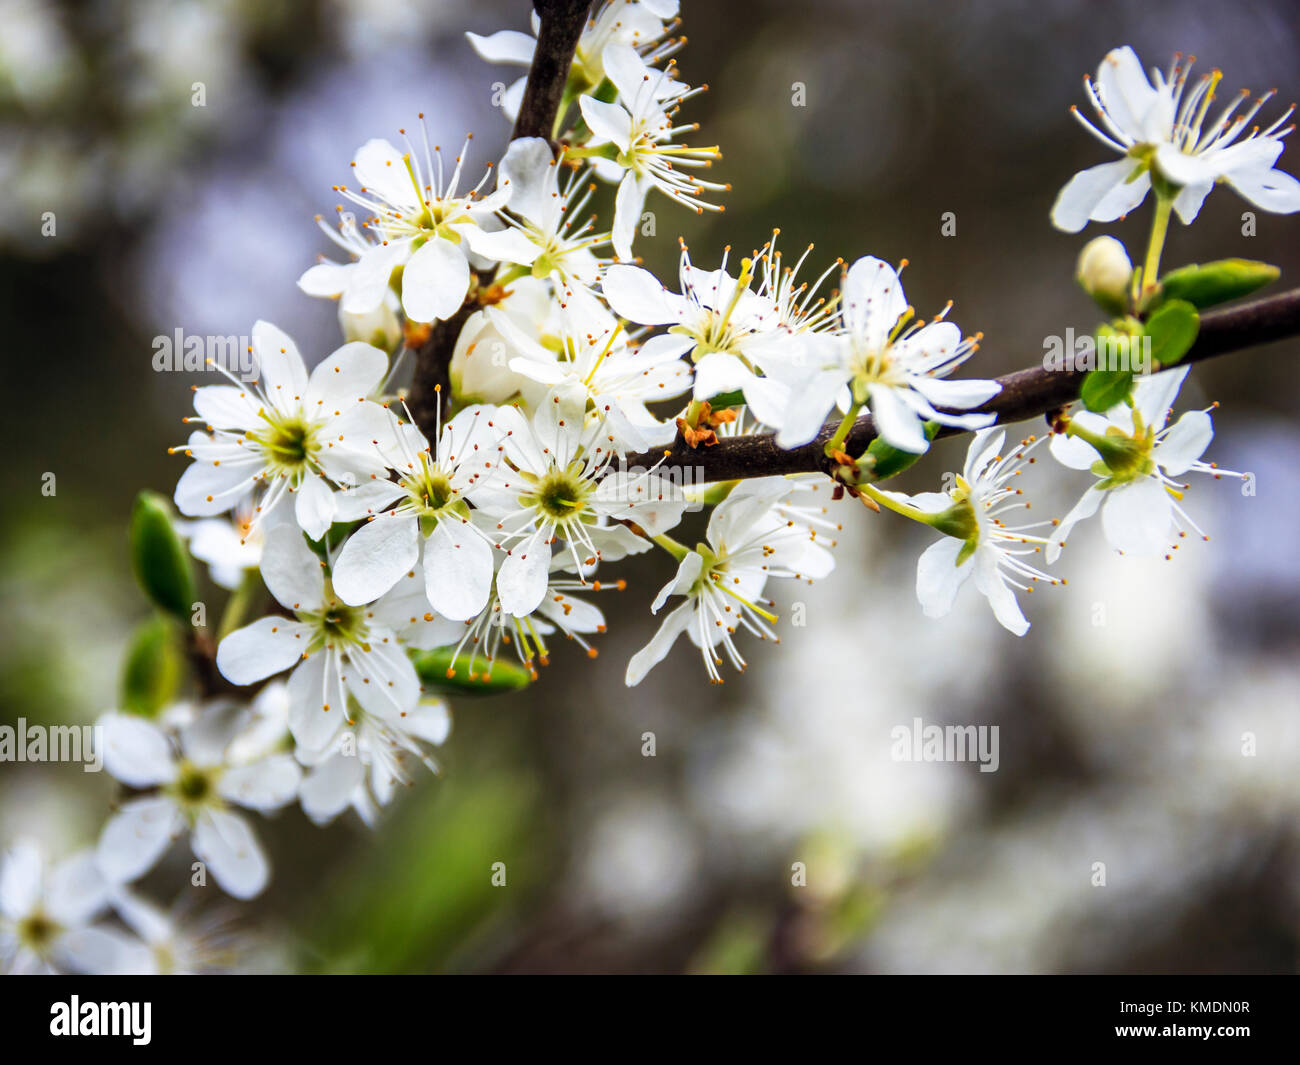 Close-up of white flowers on hawthorn trees. London, UK.  Plants are flowering a month earlier in the UK as the climate heats up, a study has found. Stock Photo